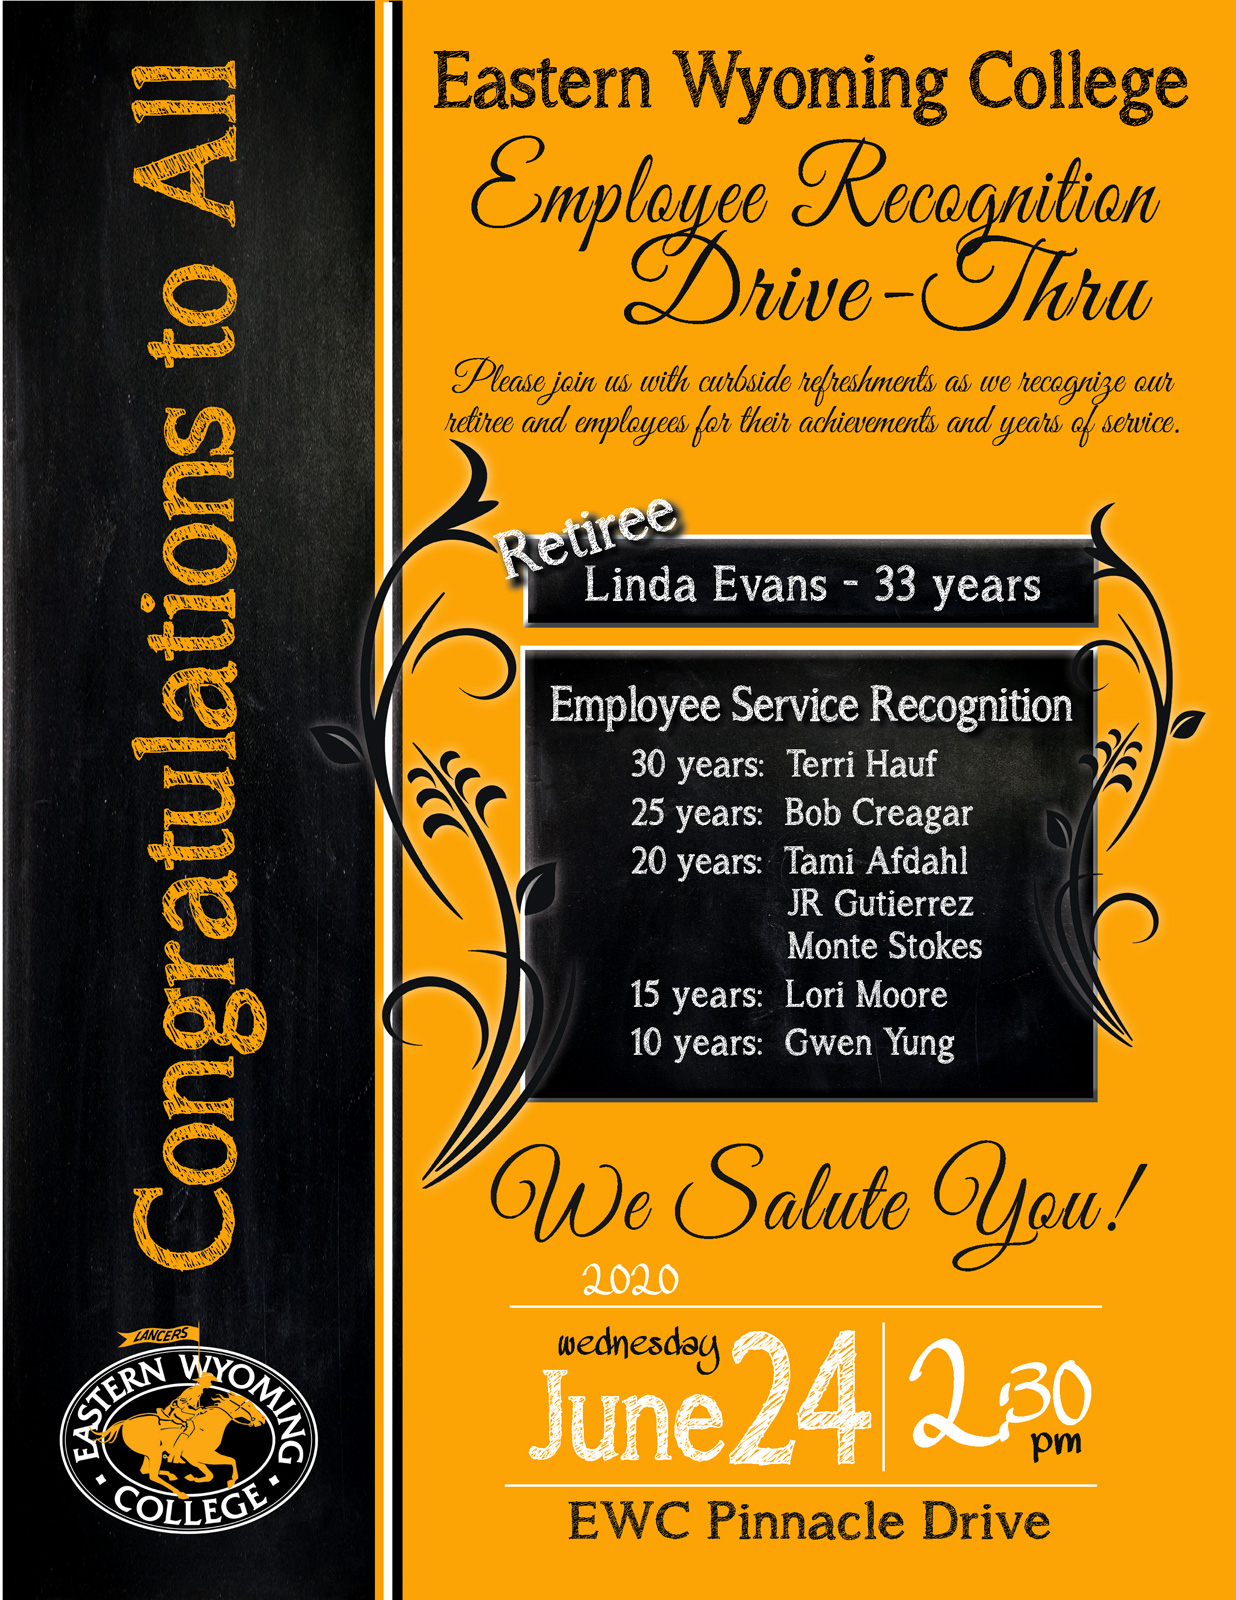 Eastern Wyoming College Employee Recognition Drive-Thru